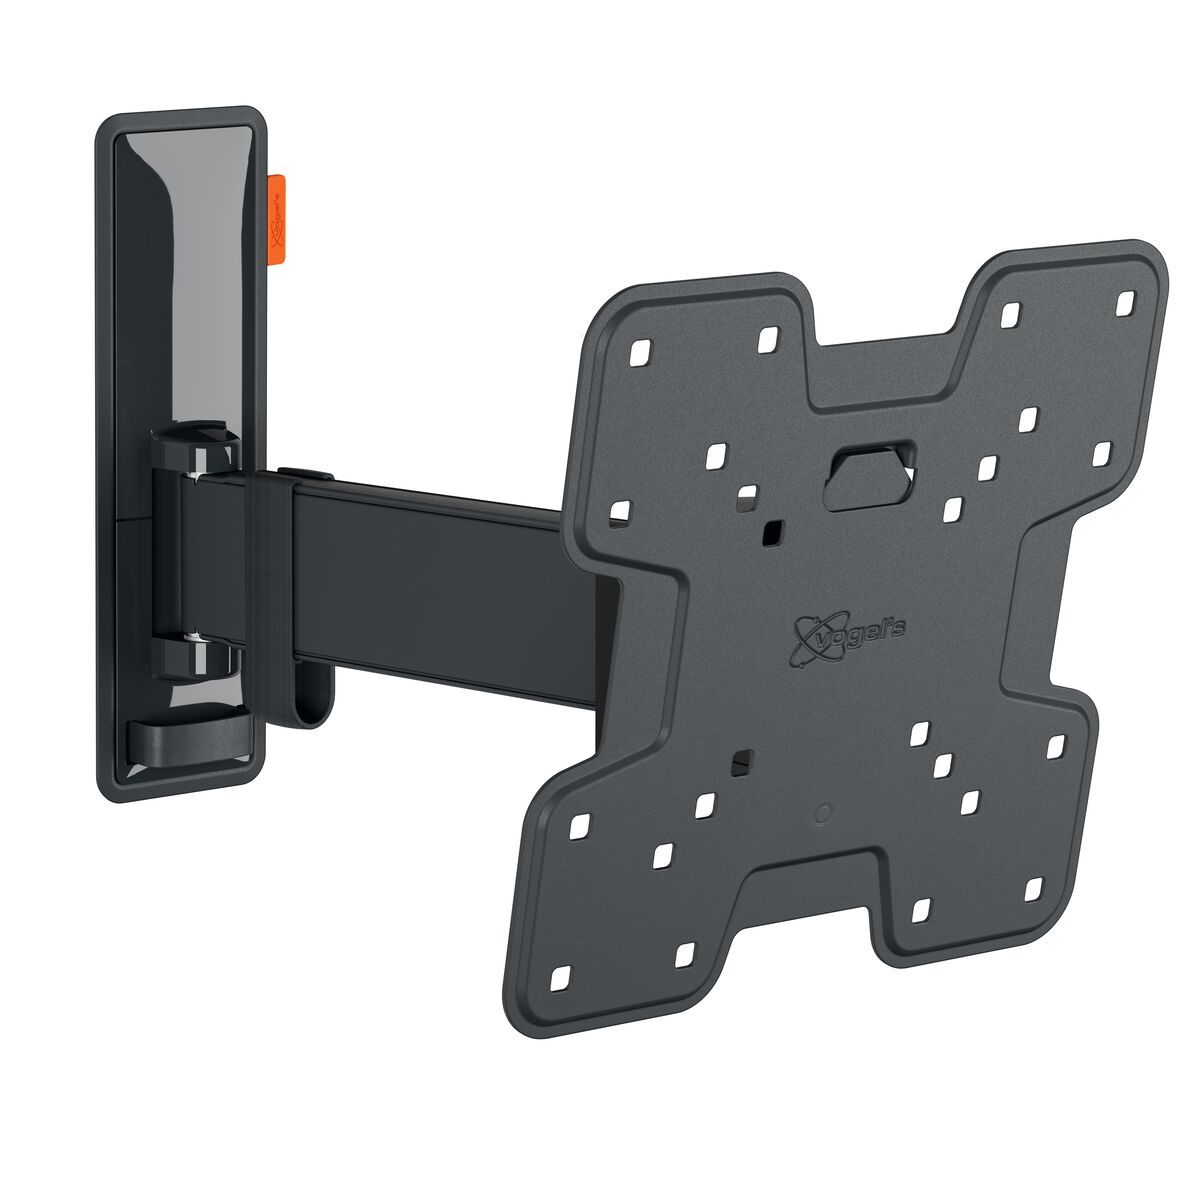 Vogel's TVM 3225 Full-Motion TV Wall Mount - Suitable for 19 up to 43 inch TVs - Motion (up to 120°) swivel - Tilt up to 20° - Product